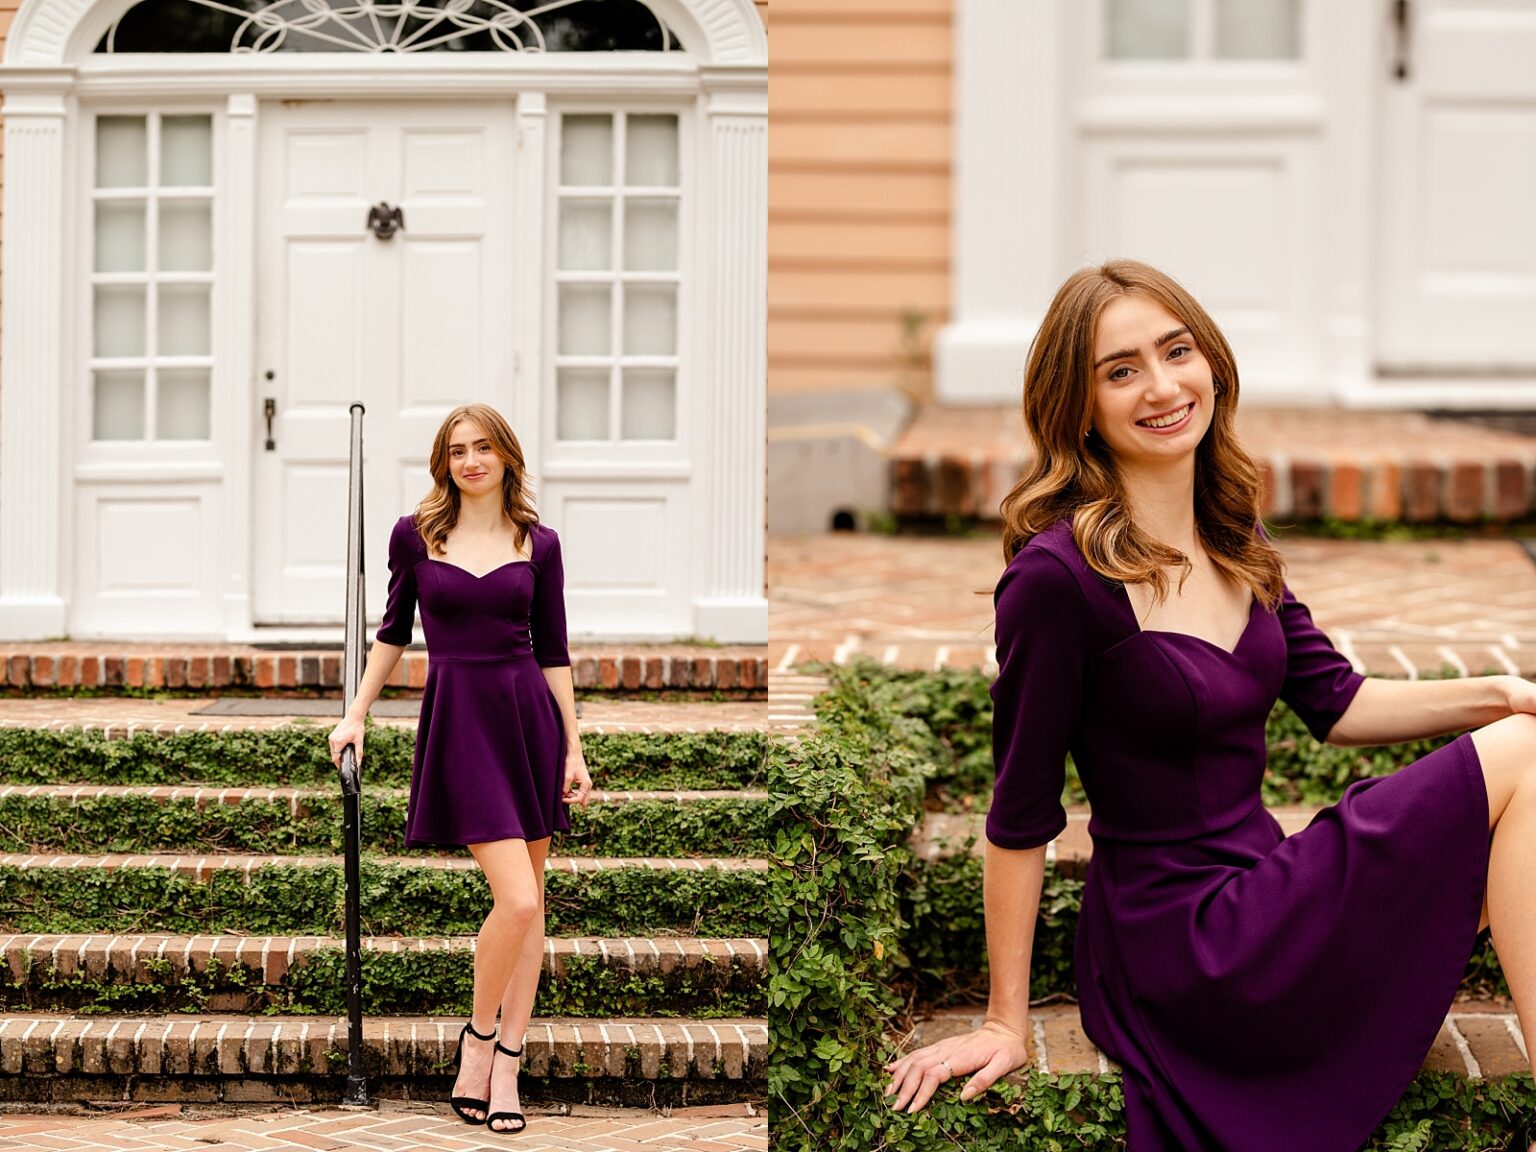 Tallahassee senior photographer takes pictures at Alfred Maclay Gardens in purple dress.